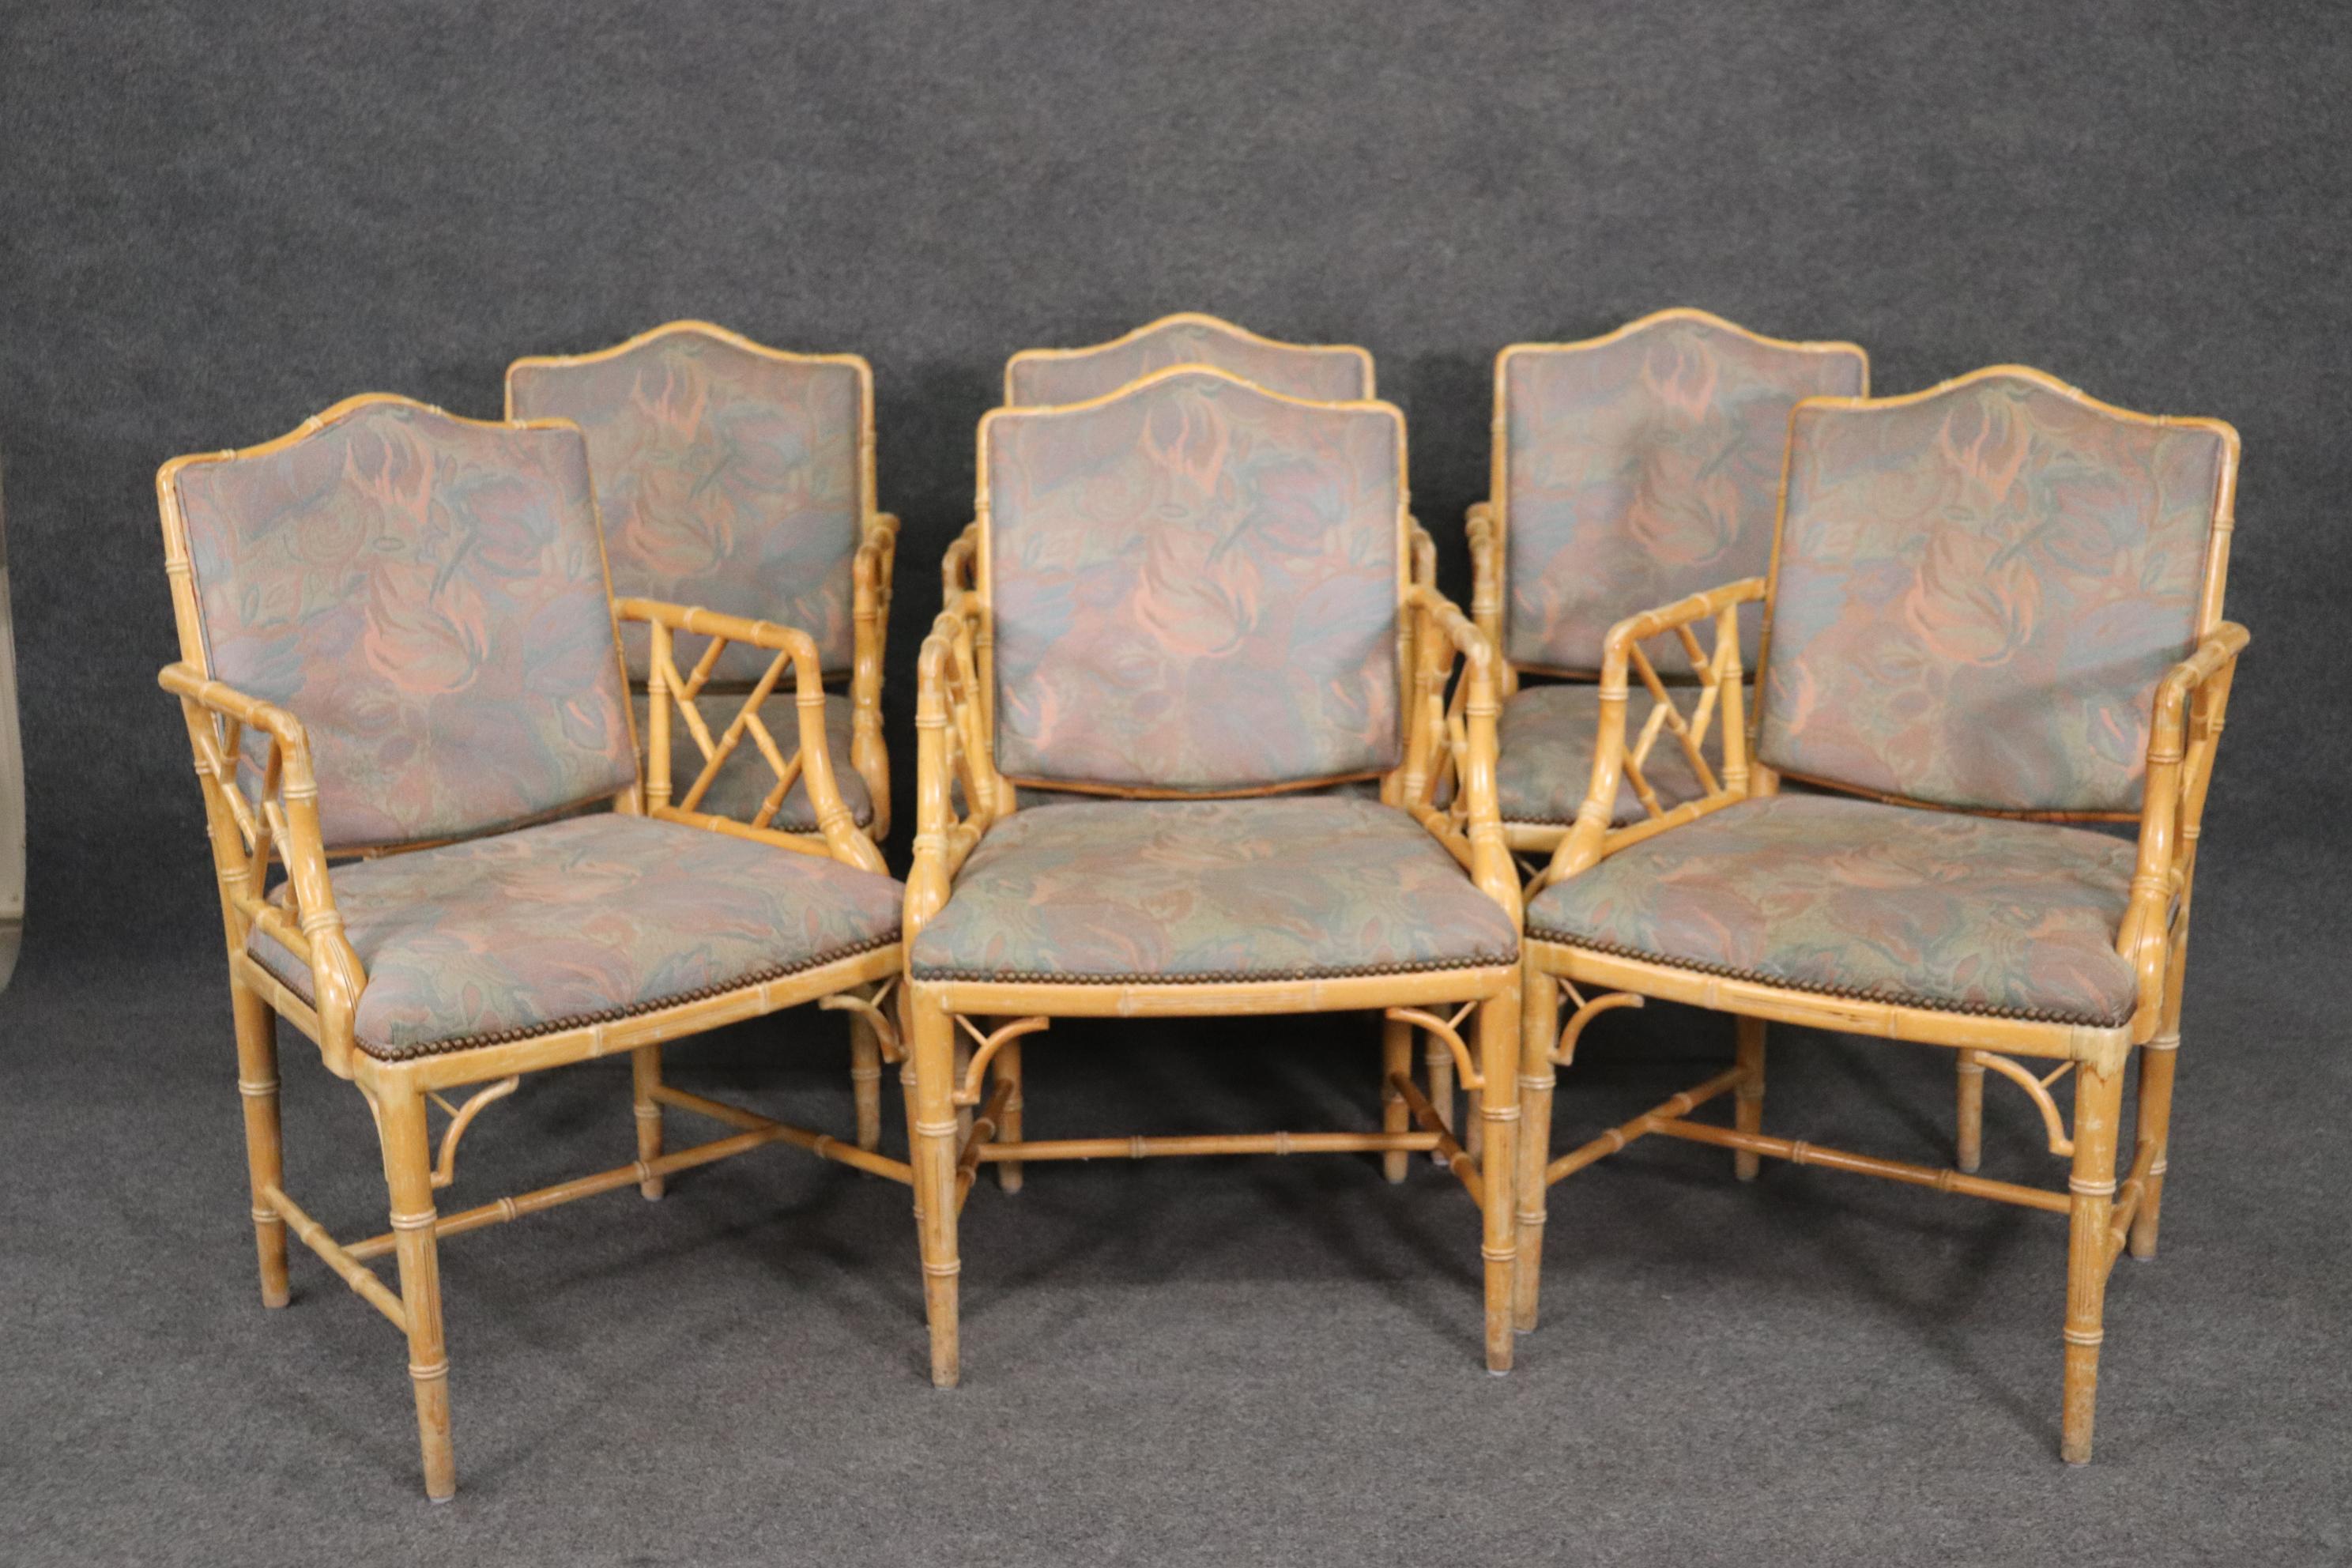 This is a beautiful set of Hollywood Regency chairs. The chairs are done in faux bamboo and may need reupholstery. However the frames are gorgeous. The chairs each measure 23 wide x 22 deep x 36 tall with an 18 inch seat height.